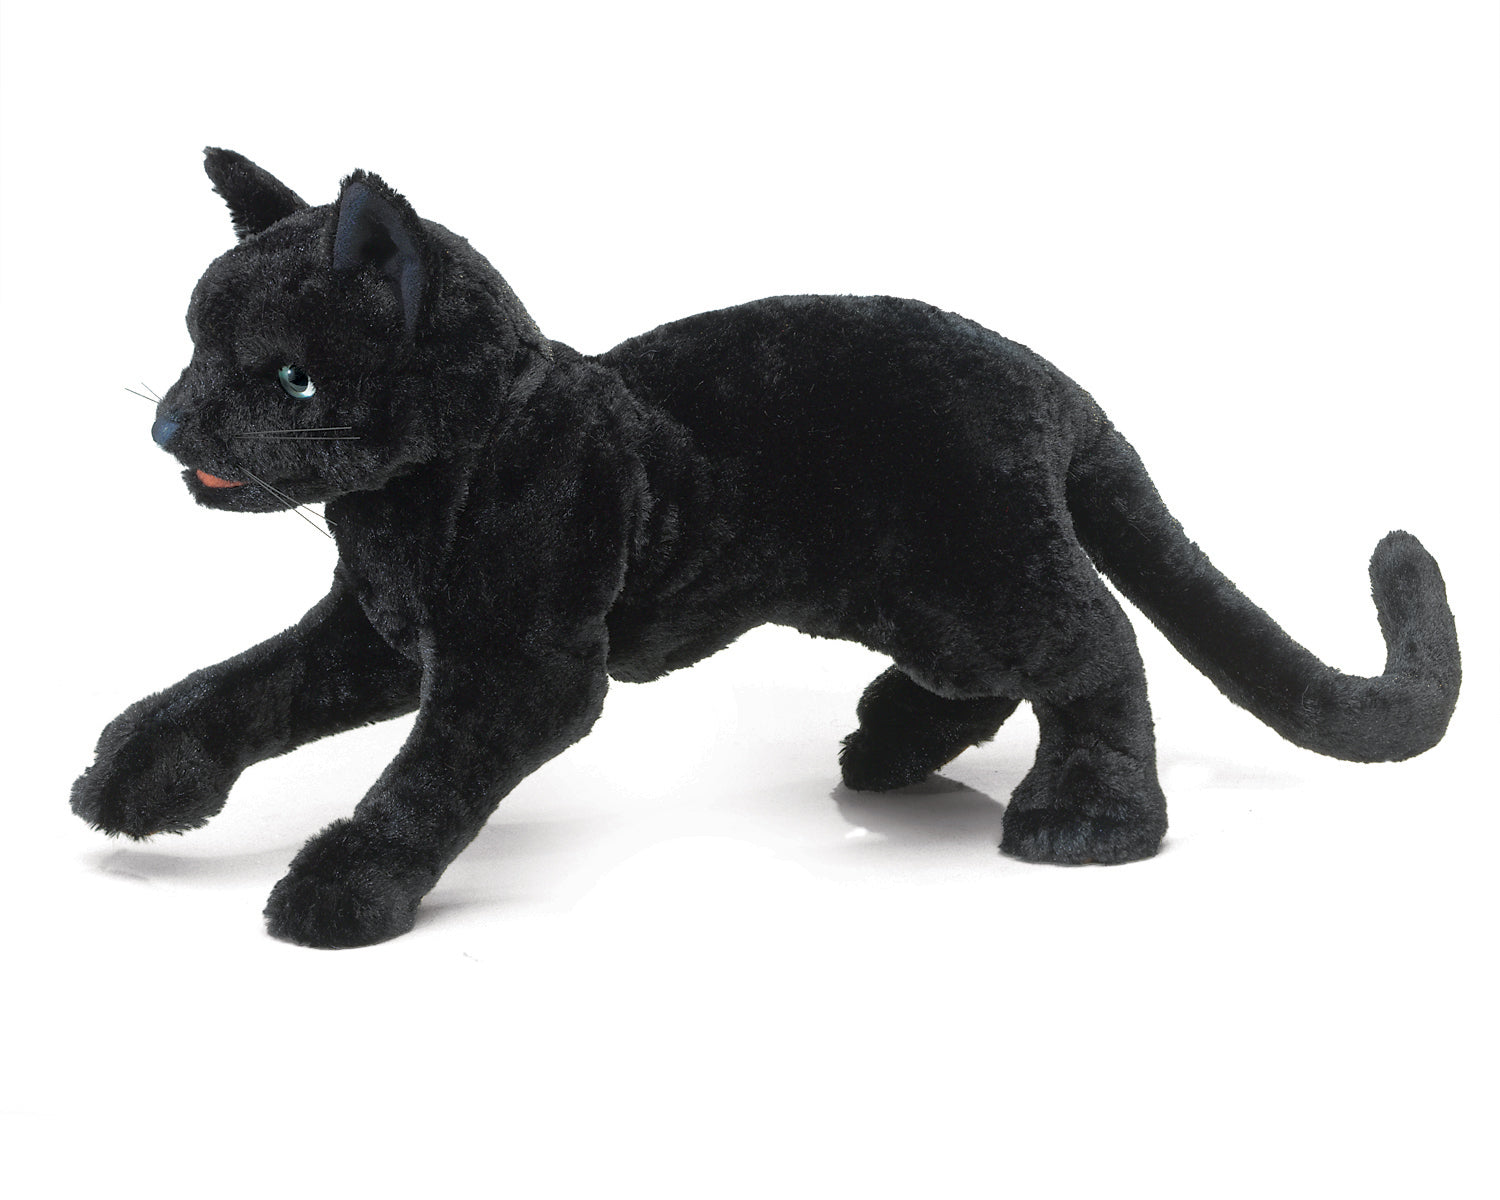 Black cat puppet by Folkmanis has sleek, short, ebony plush with movable mouth and front legs. This puppet is 20 inches long, 5 inches wide, 6 inches tall and weighs 5.6 ounces. This item sells for $25.99.